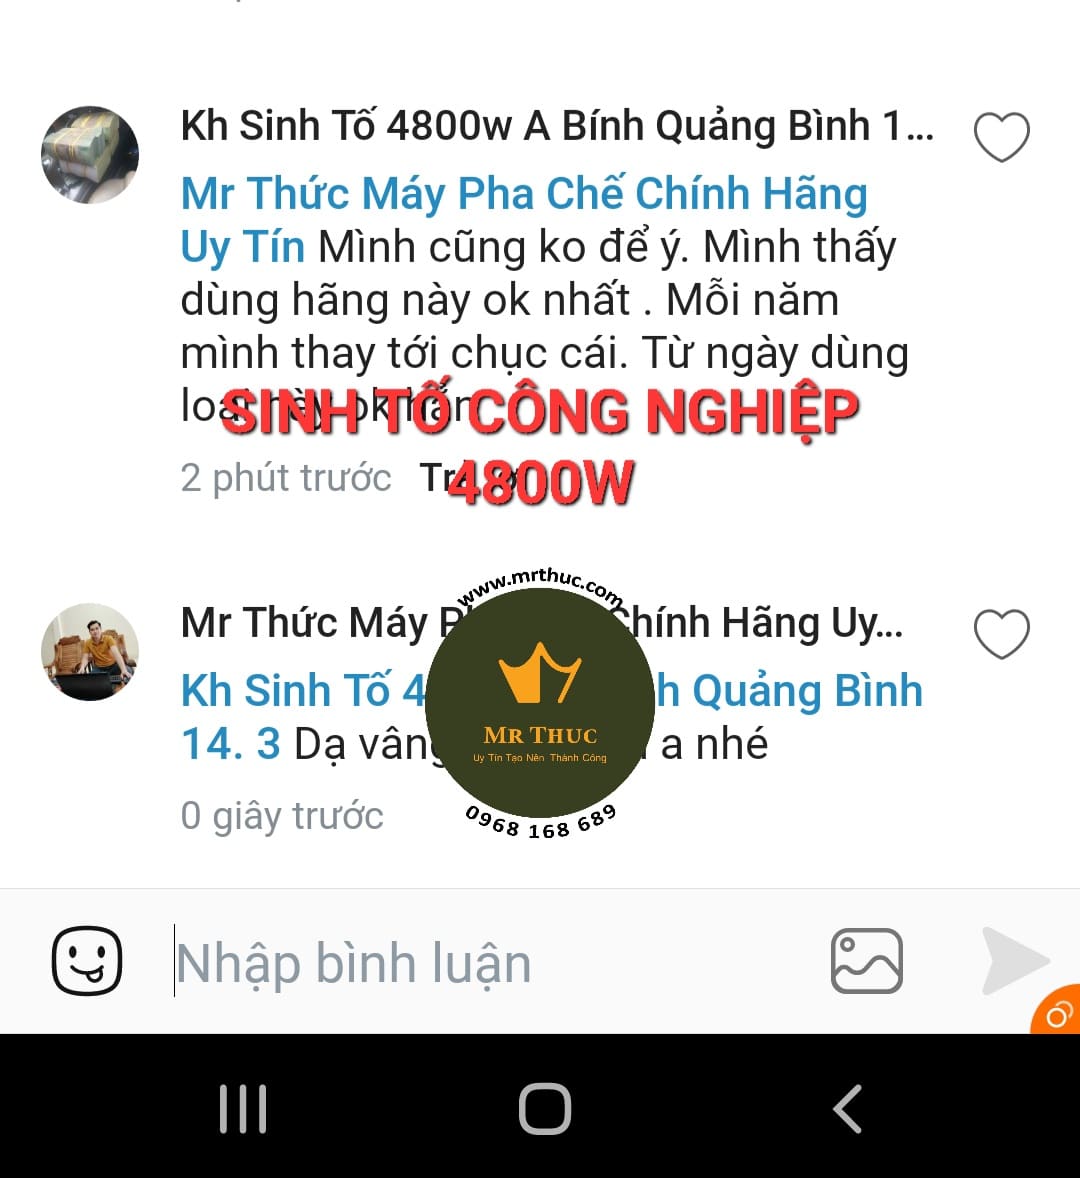 sinh to cong nghiep 4800w